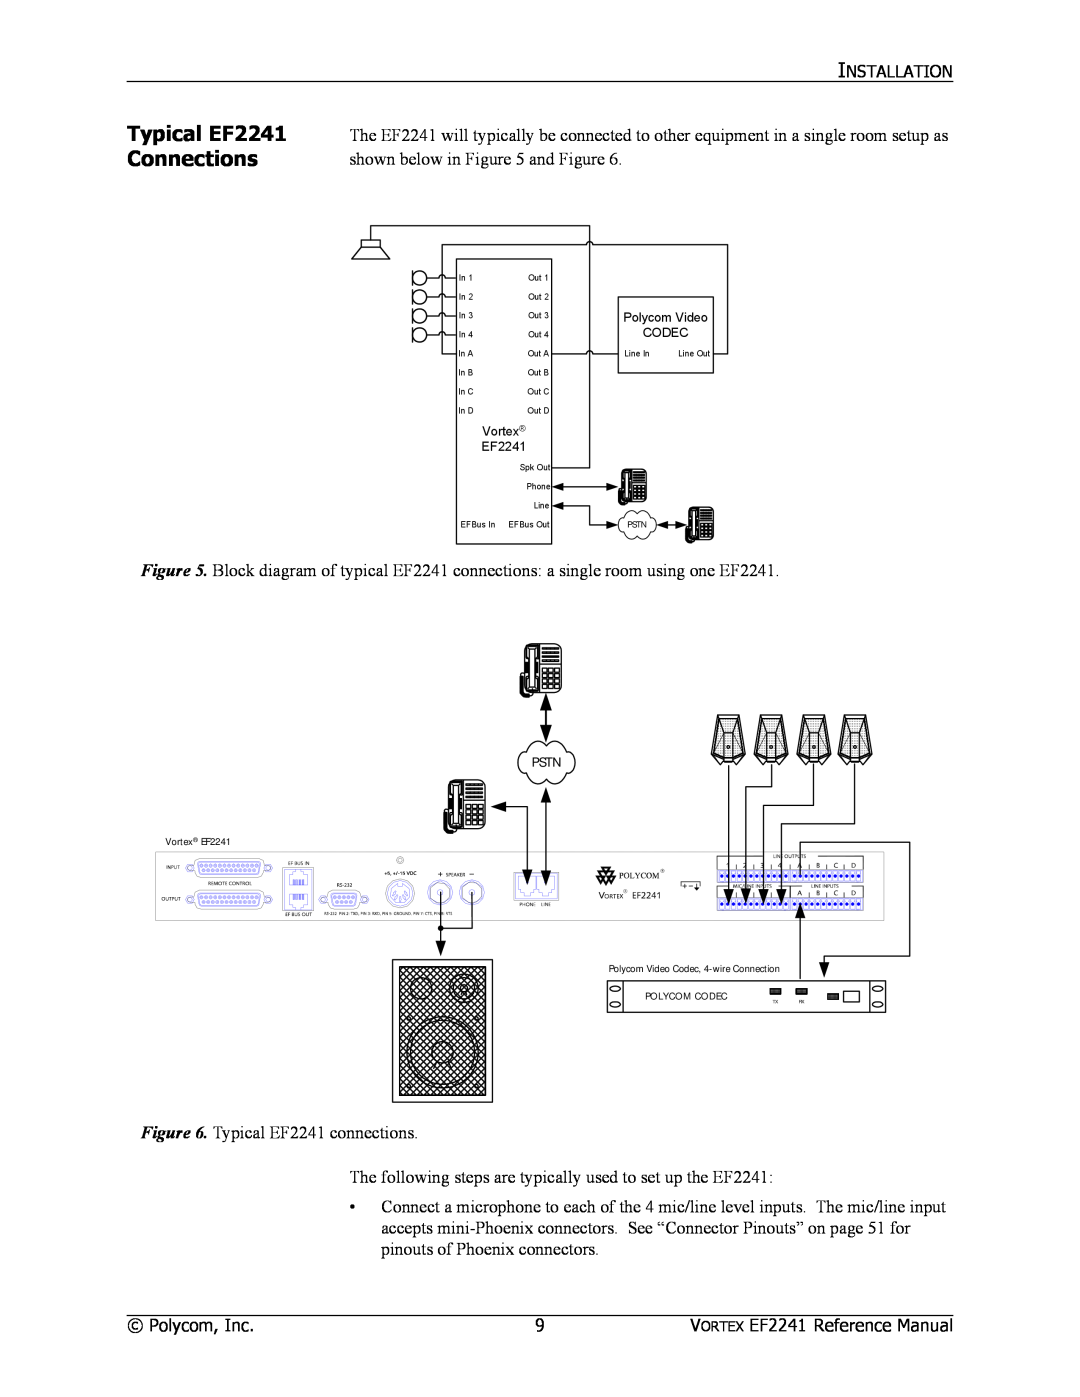 Polycom manual Typical EF2241 Connections 